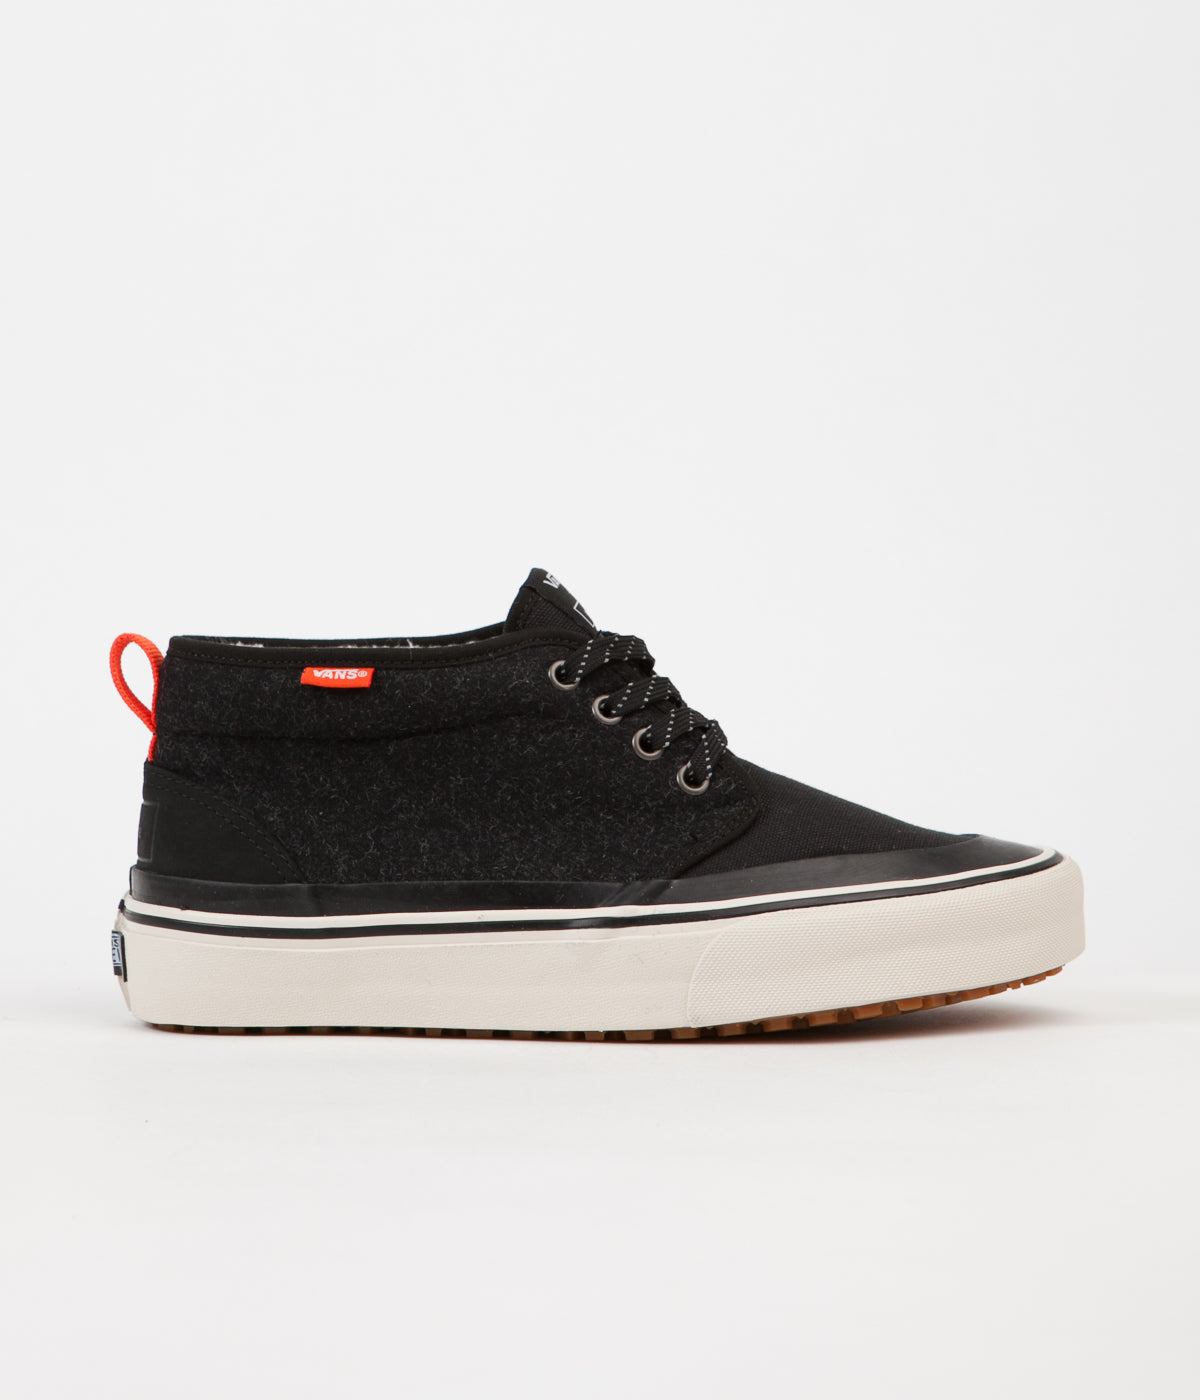 Vans X Finisterre Chukka HF Shoes 